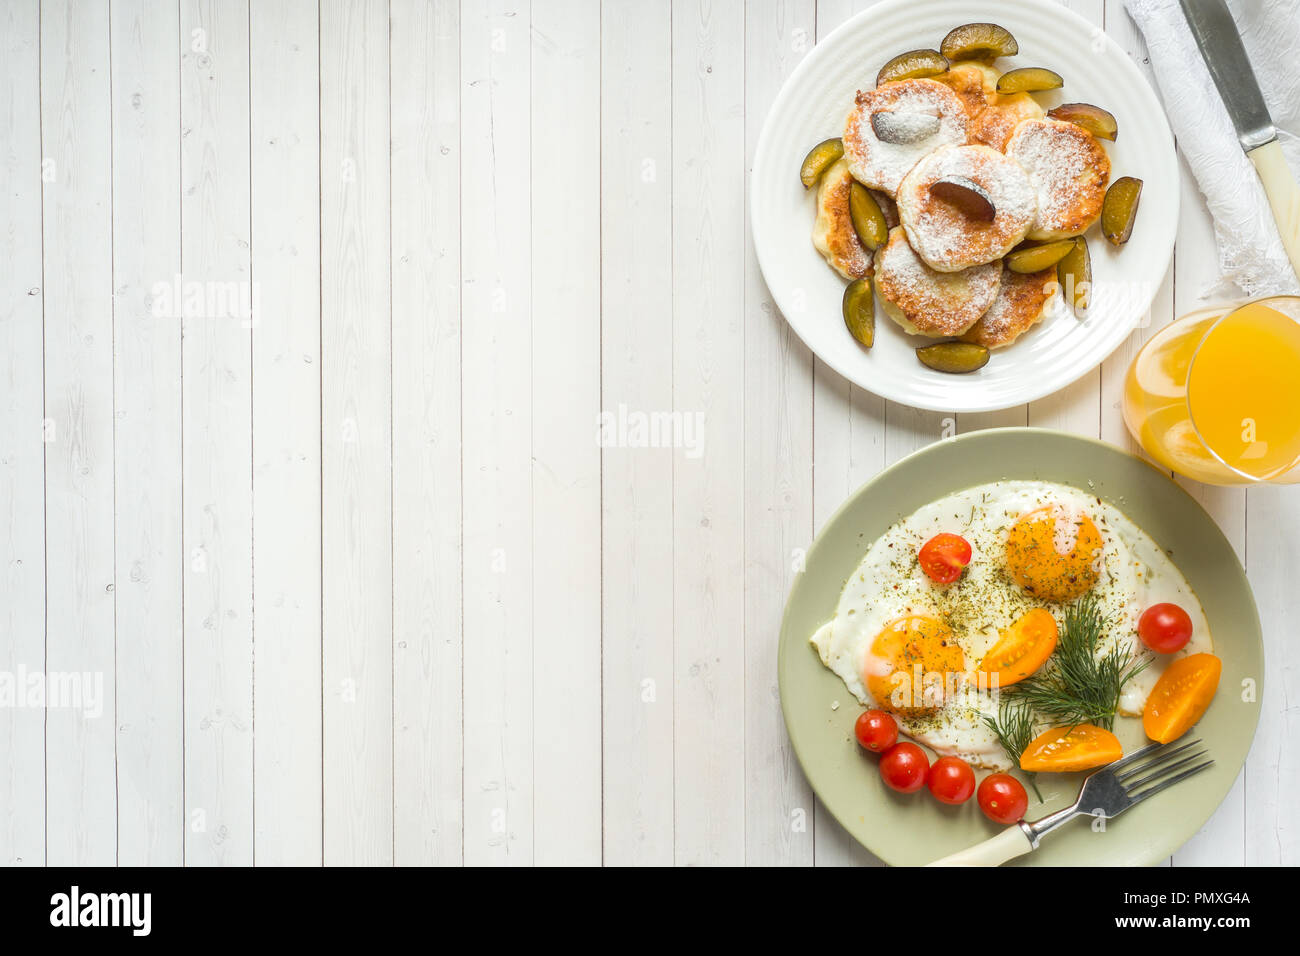 Concept Of Breakfast Fried Eggs Cottage Cheese Pancakes Plums